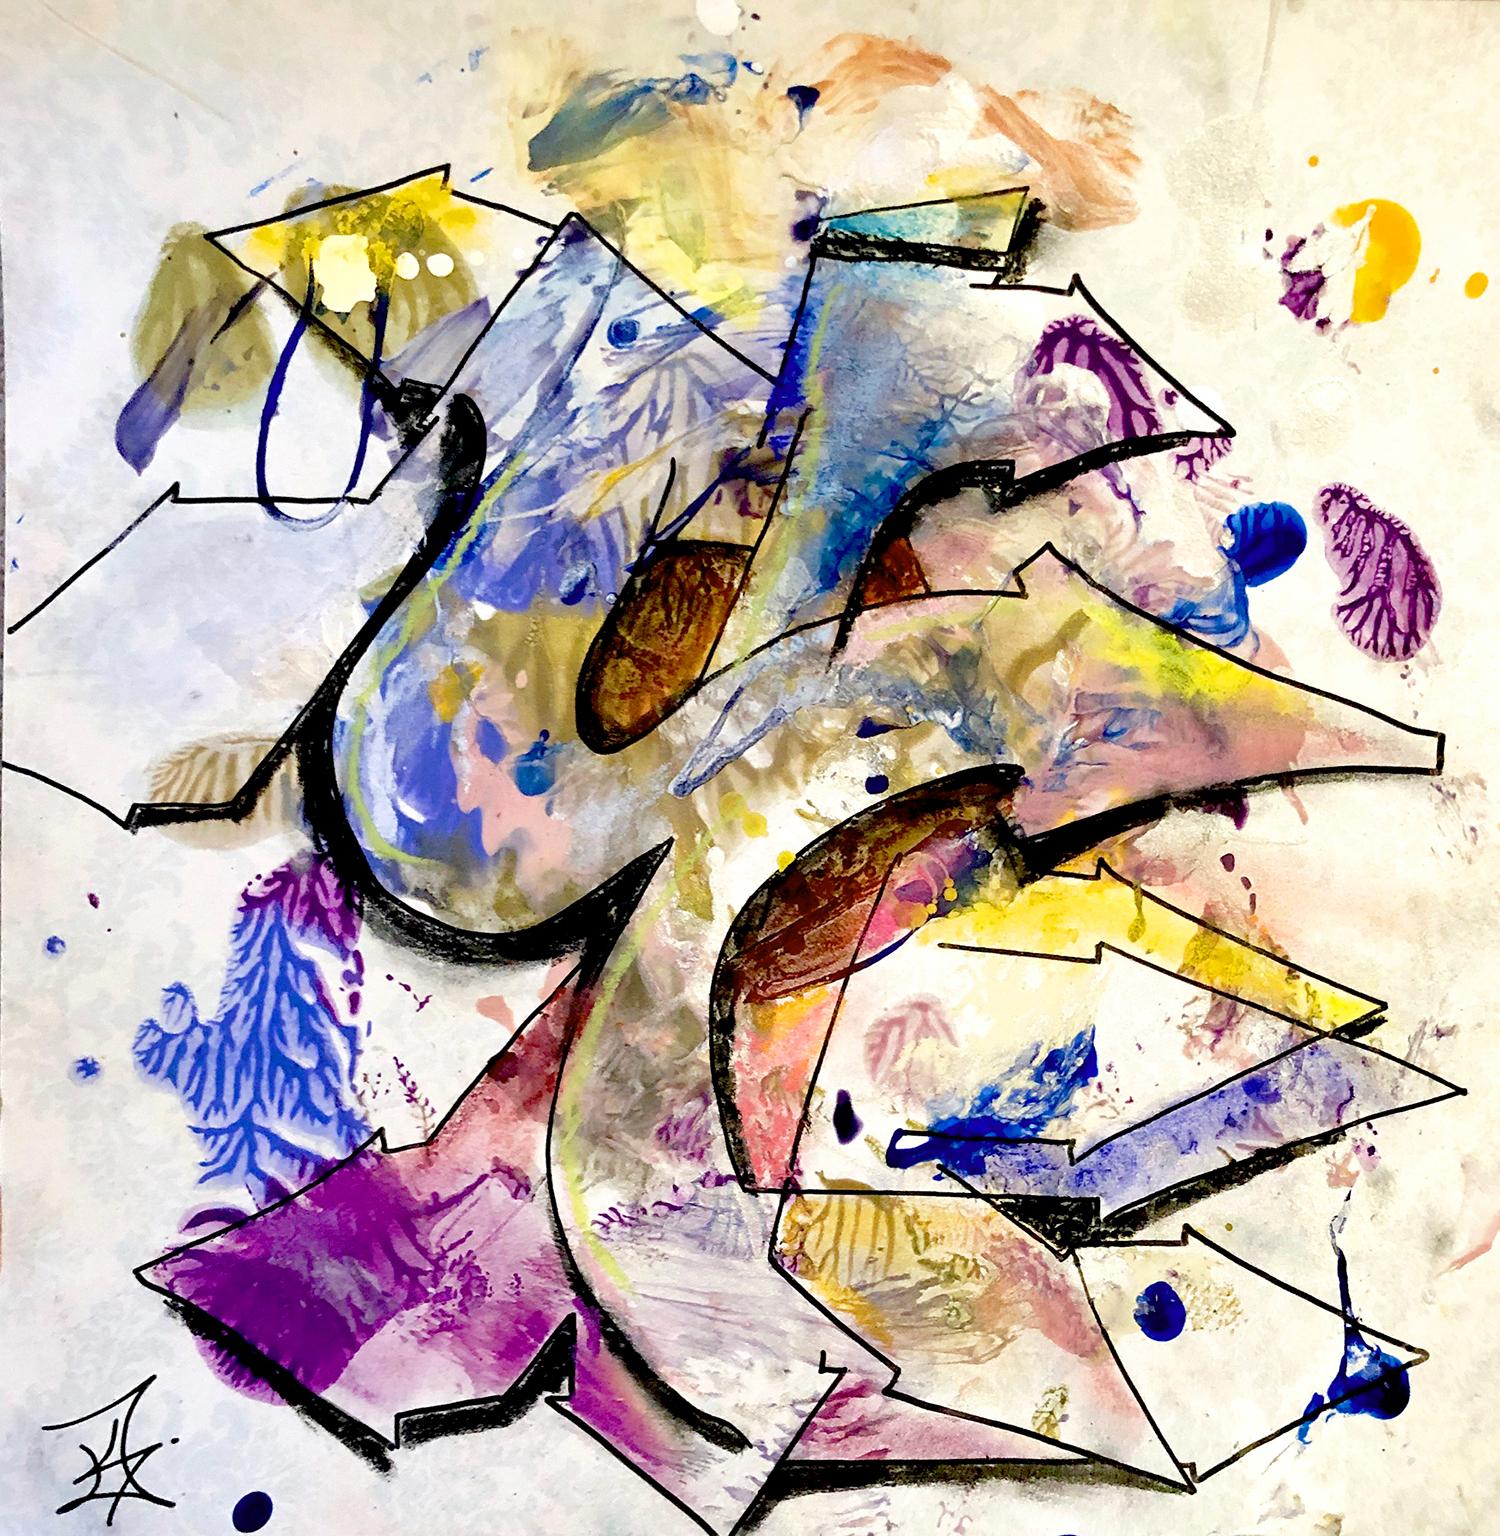 Kel1st Abstract Print - Kelography Letters (Graffiti "Y" Urban Graphic) / Limited ed. 25 